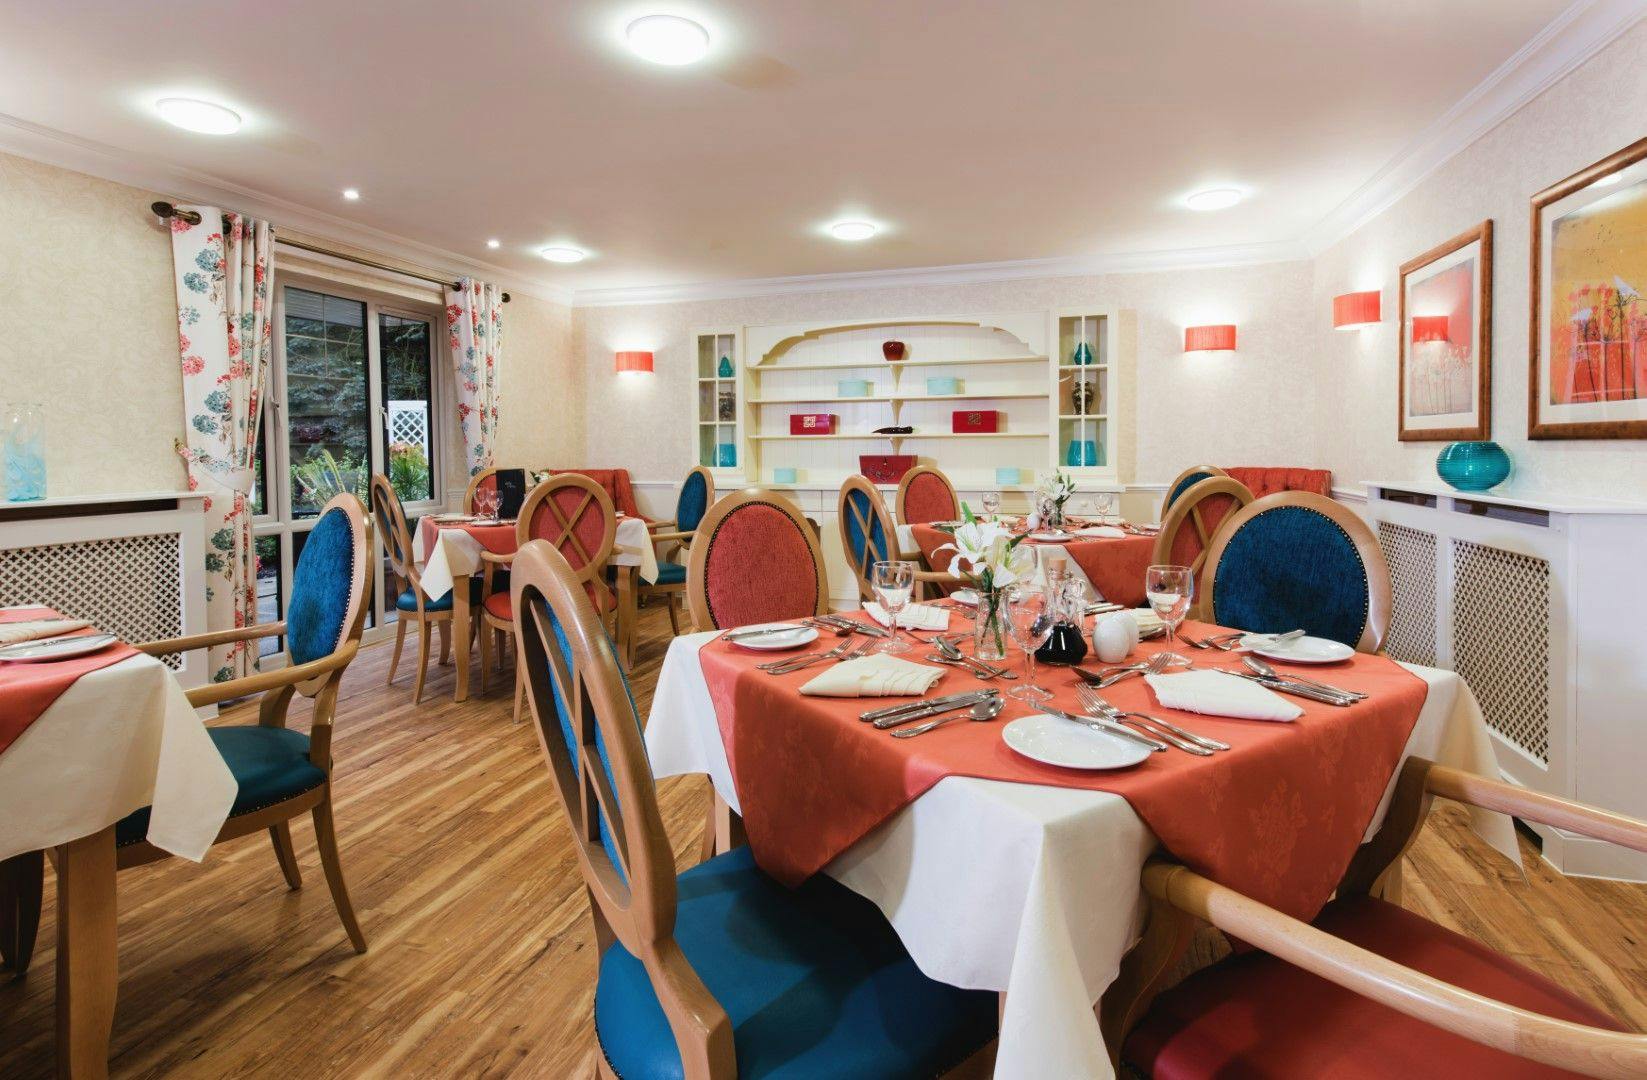 Dining Area at Anya court Care Home in Rugby, Warwickshire